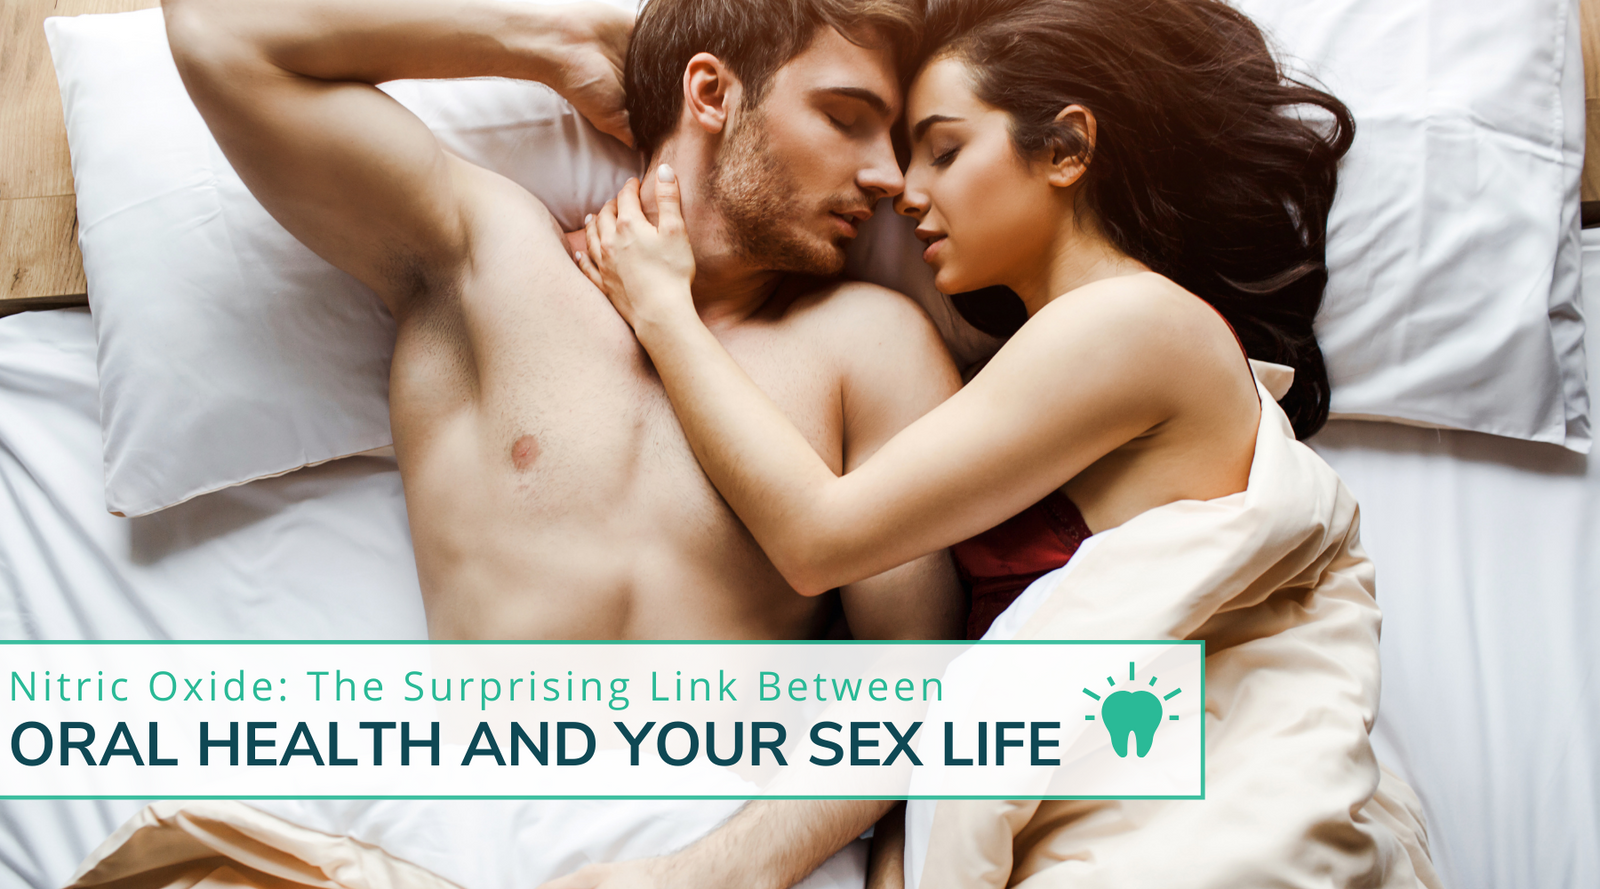 Nitric Oxide: The Surprising Link Between Oral Health and Your Sex Life